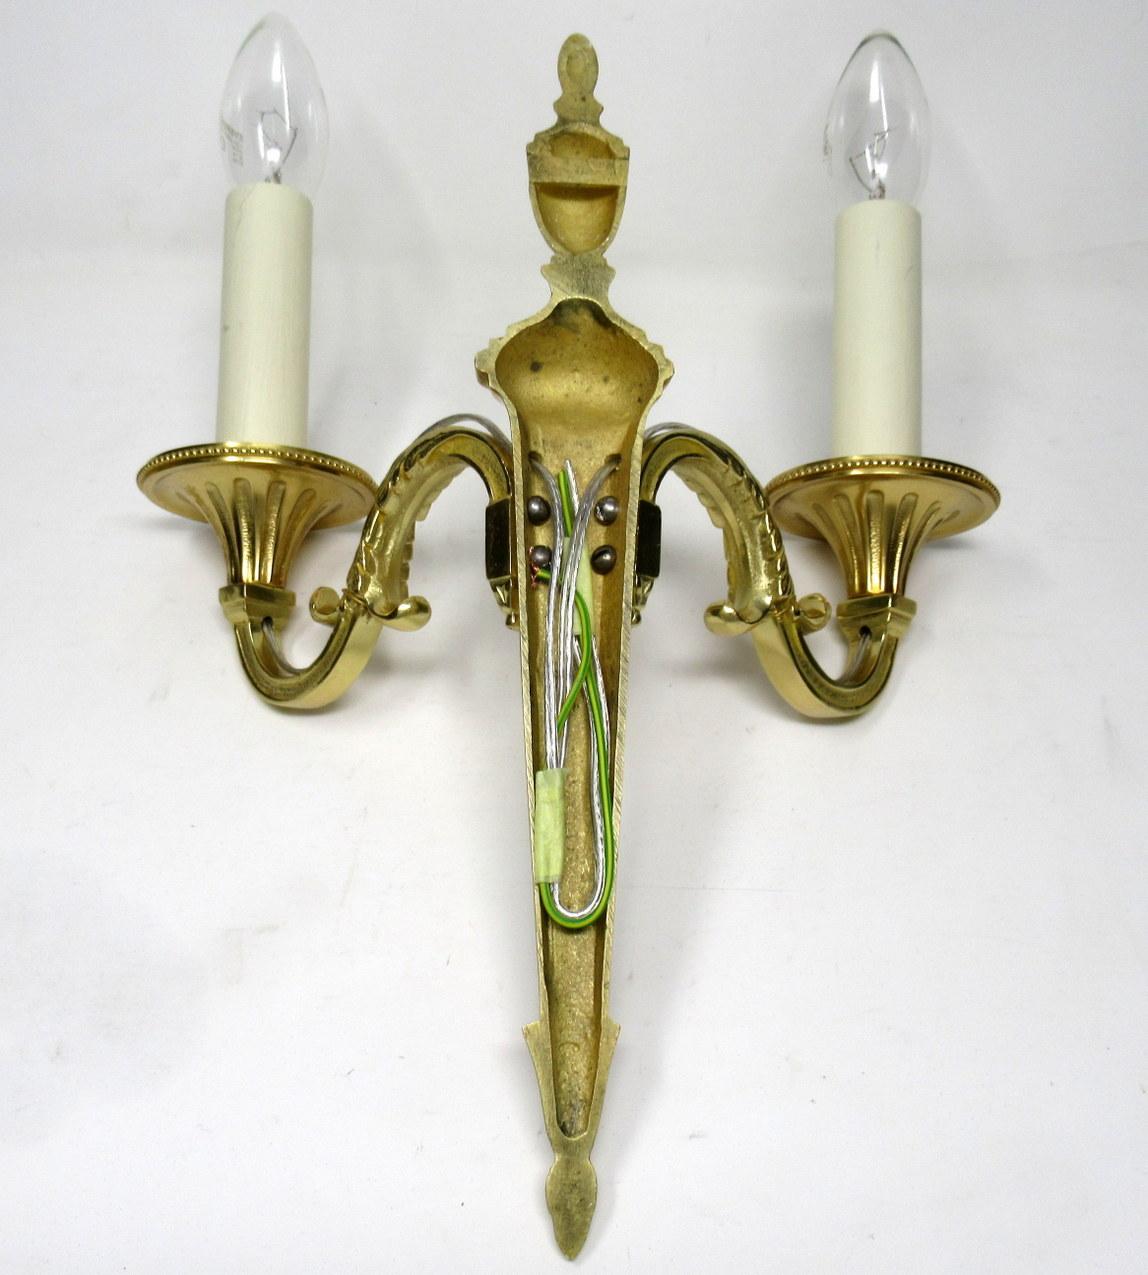 Edwardian Antique Pair of English Gilt Bronze Twin Light Wall Candle Sconces, 19th Century